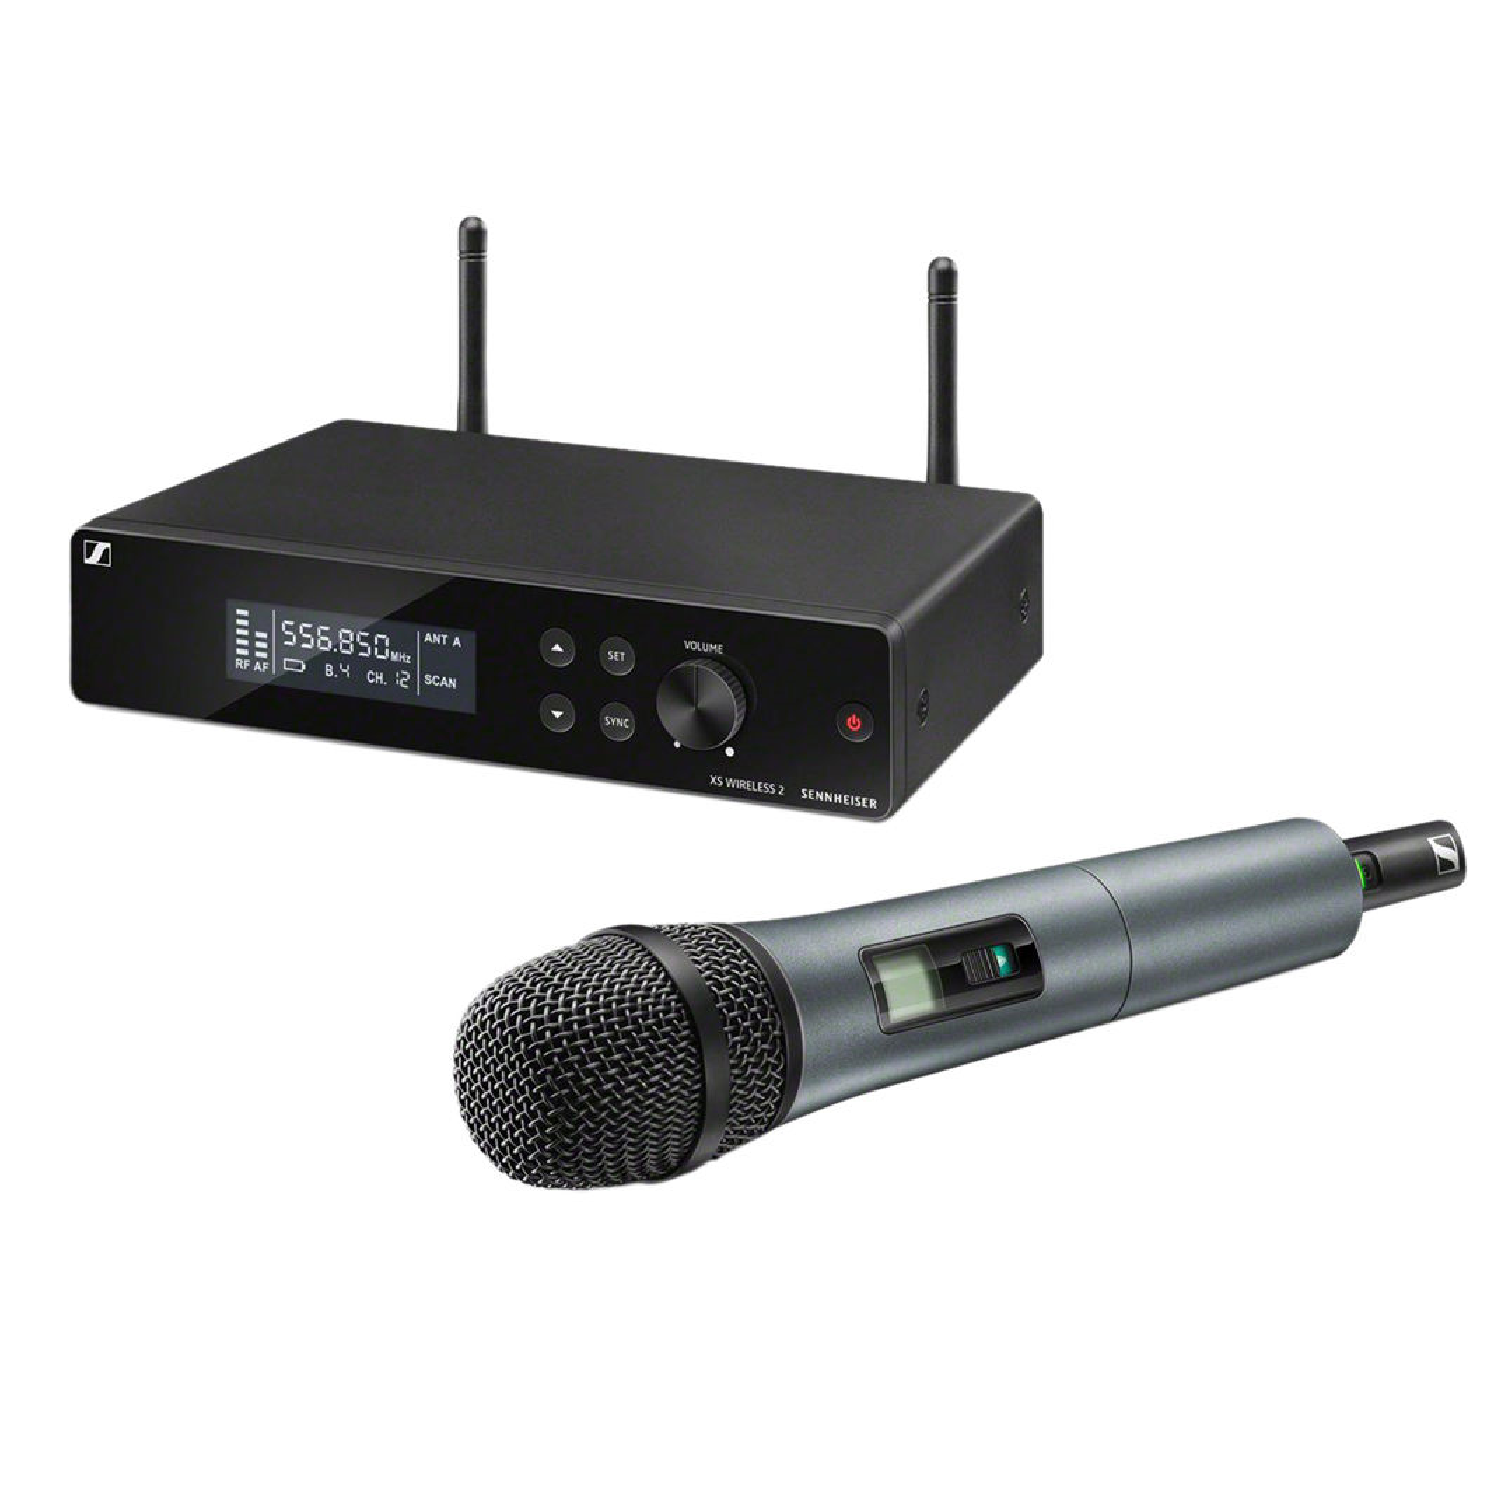 Wireless Handheld Microphone System with E865 Capsule   XSW 2 865 A sennheiser